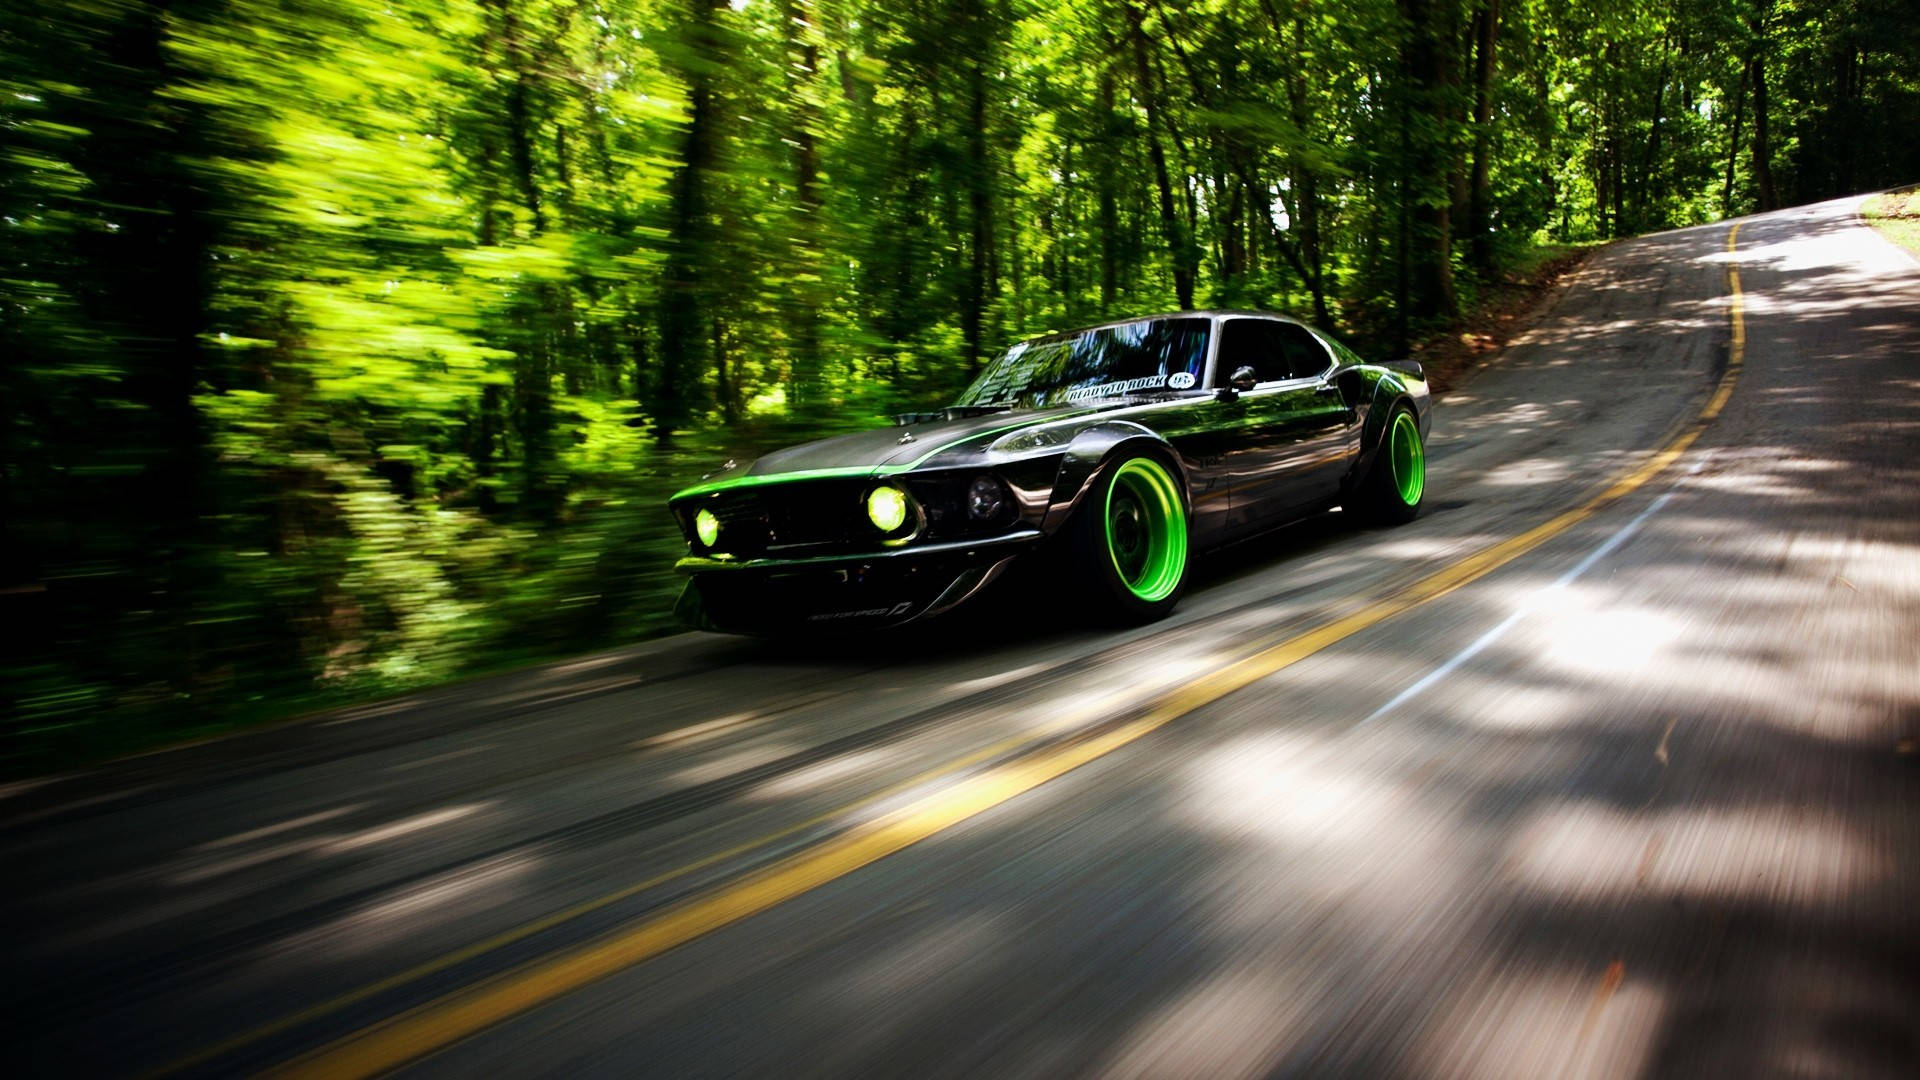 Rtr-x Green Mustang Hd Background